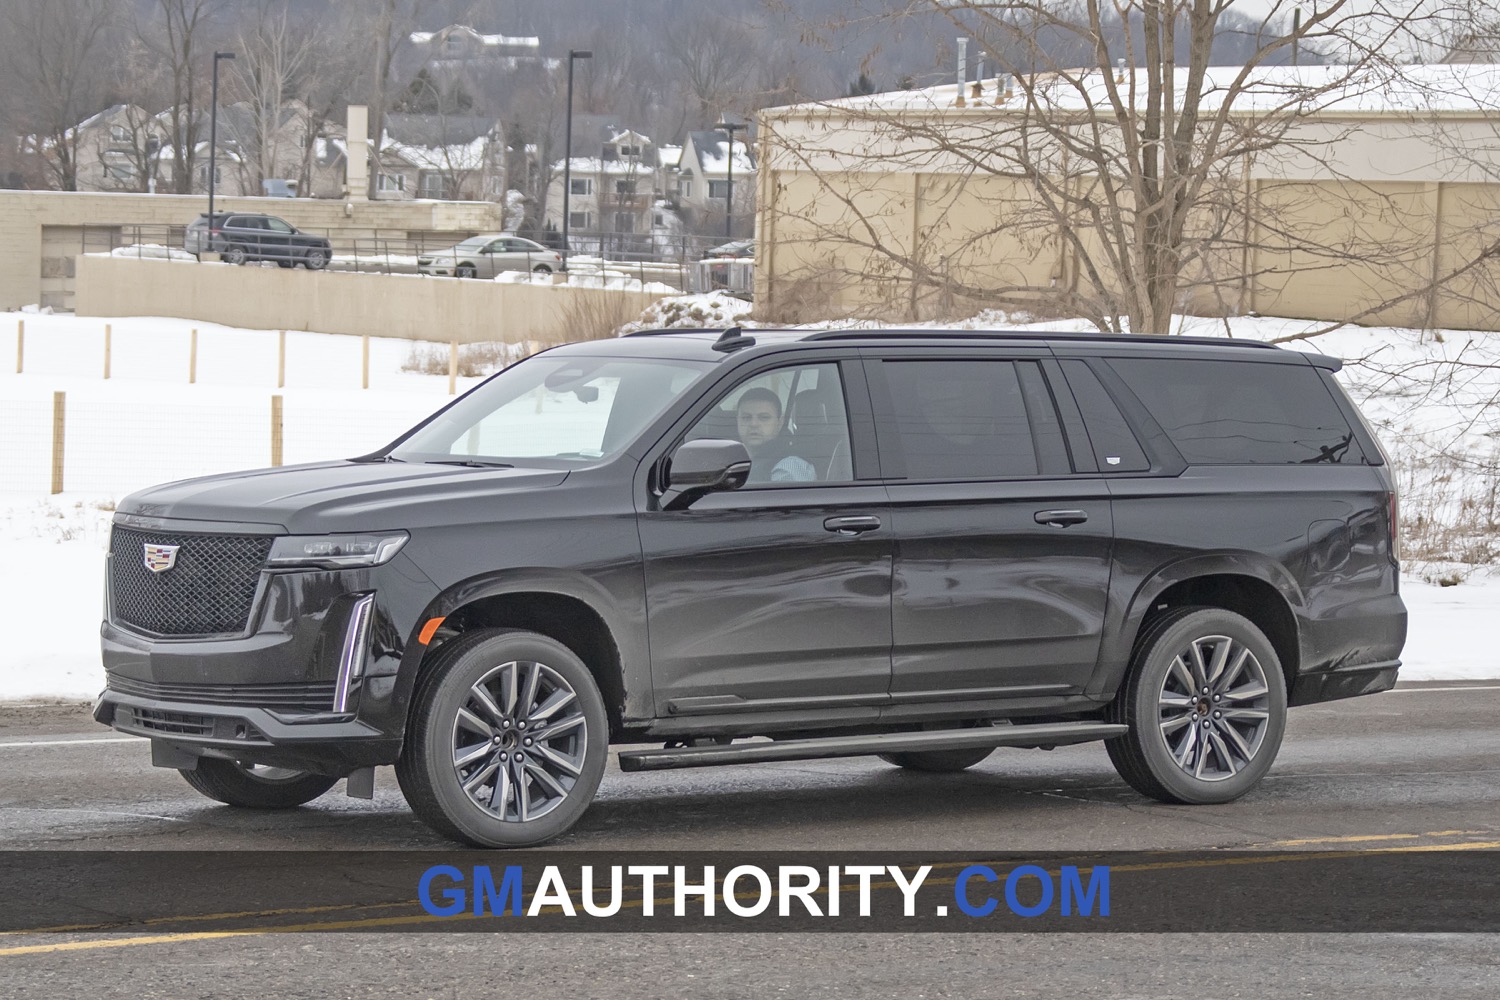 11 Cadillac Escalade ESV Spotted On The Street  GM Authority